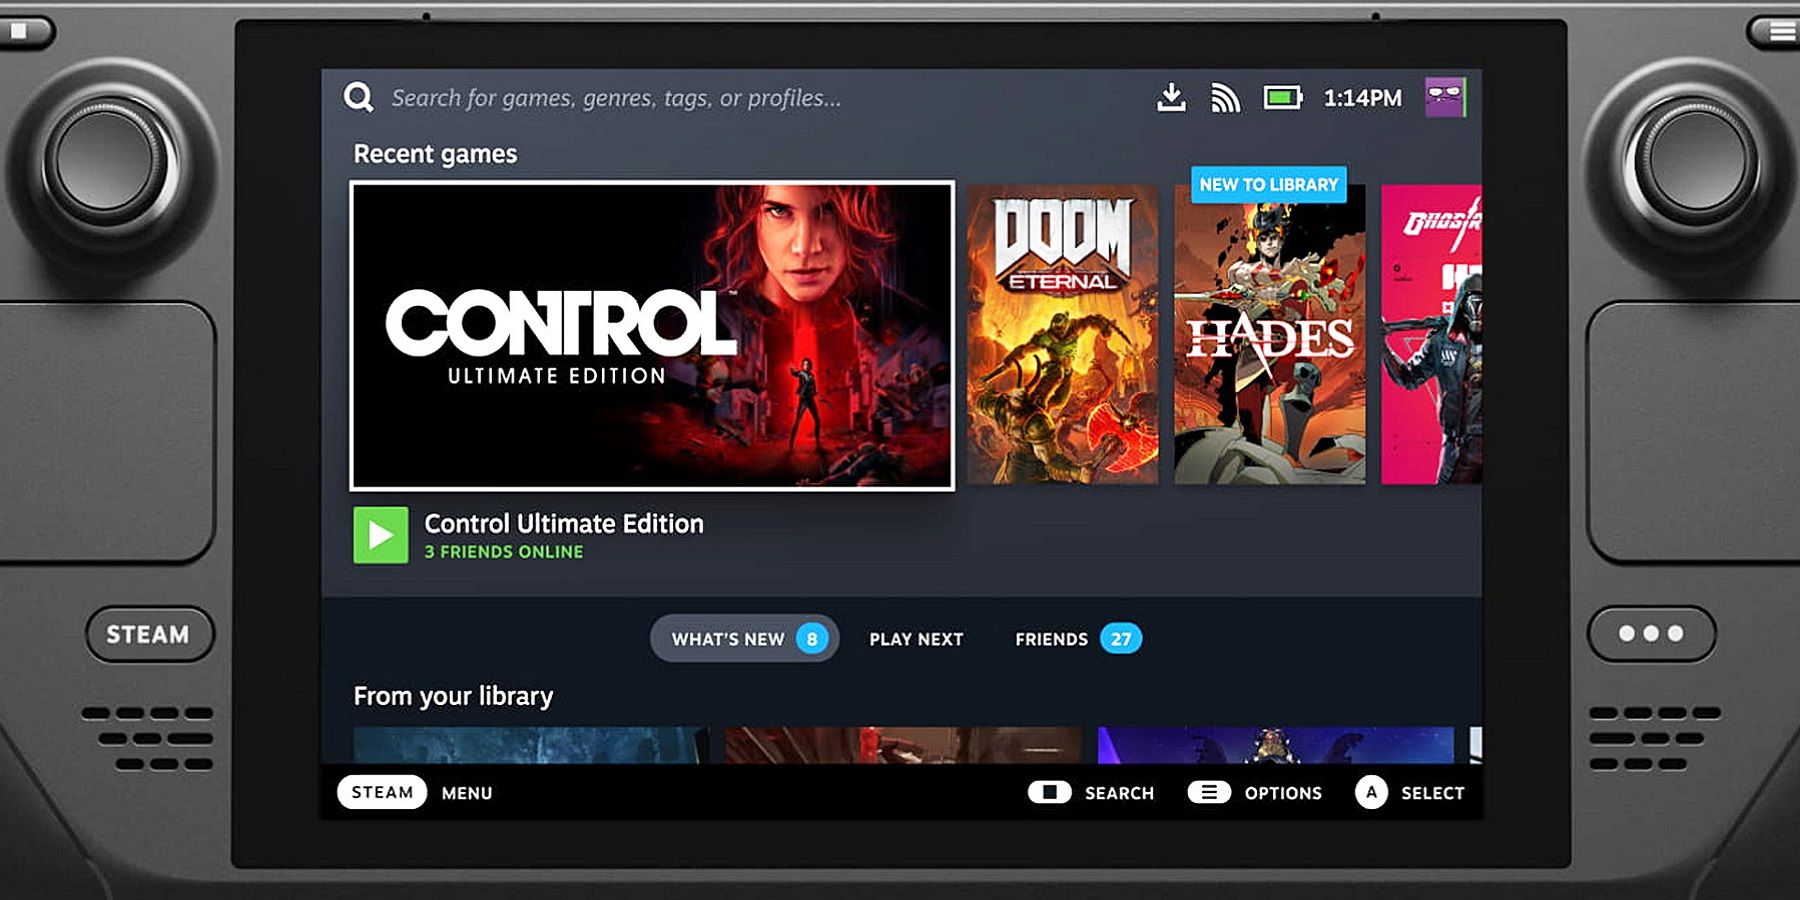 Close-up image of a Steam Deck showing a number of games on the screen, including Control and Doom Eternal.